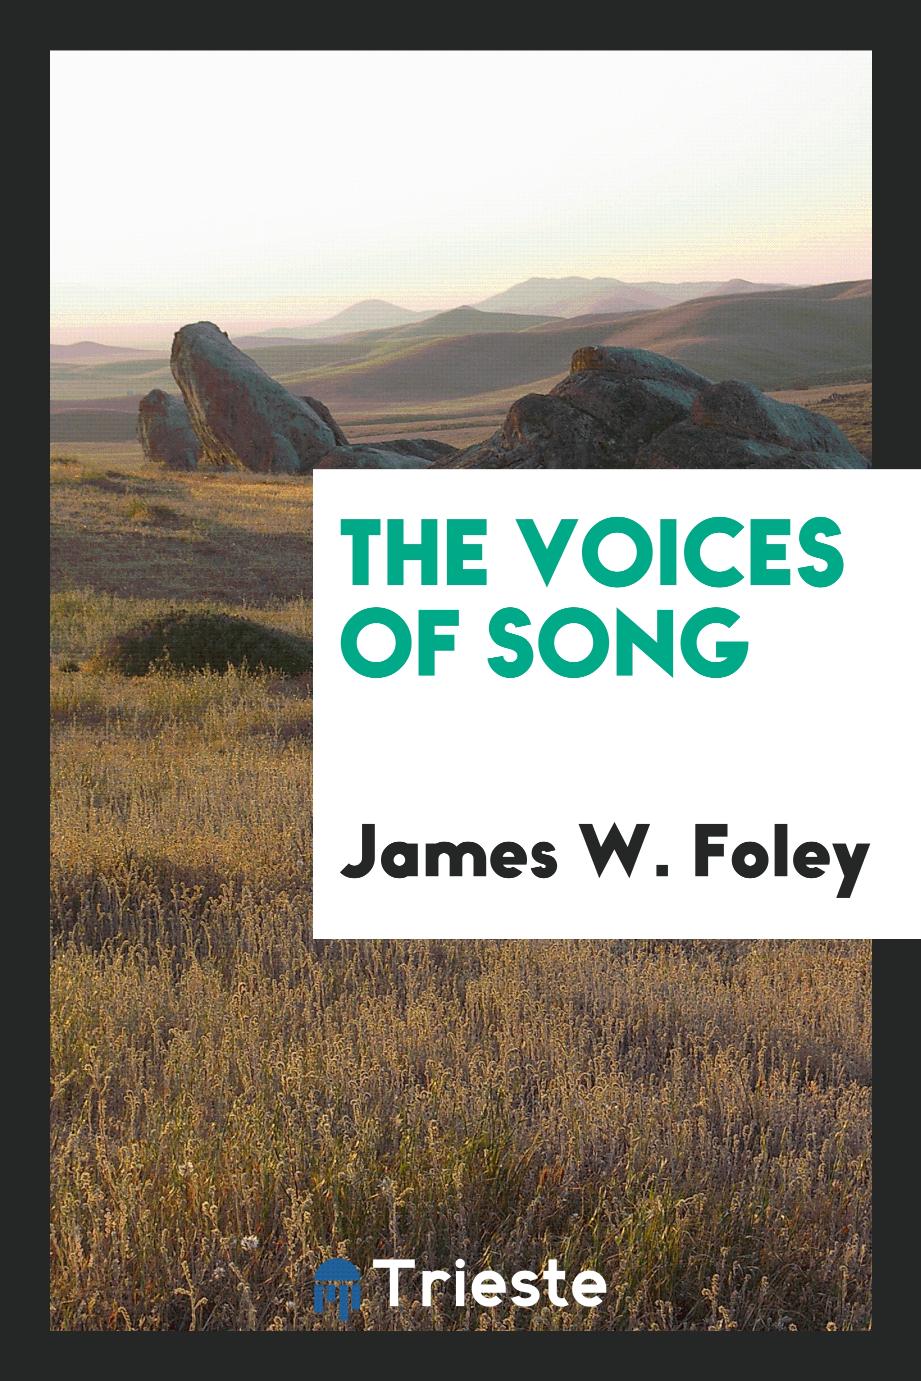 The voices of song